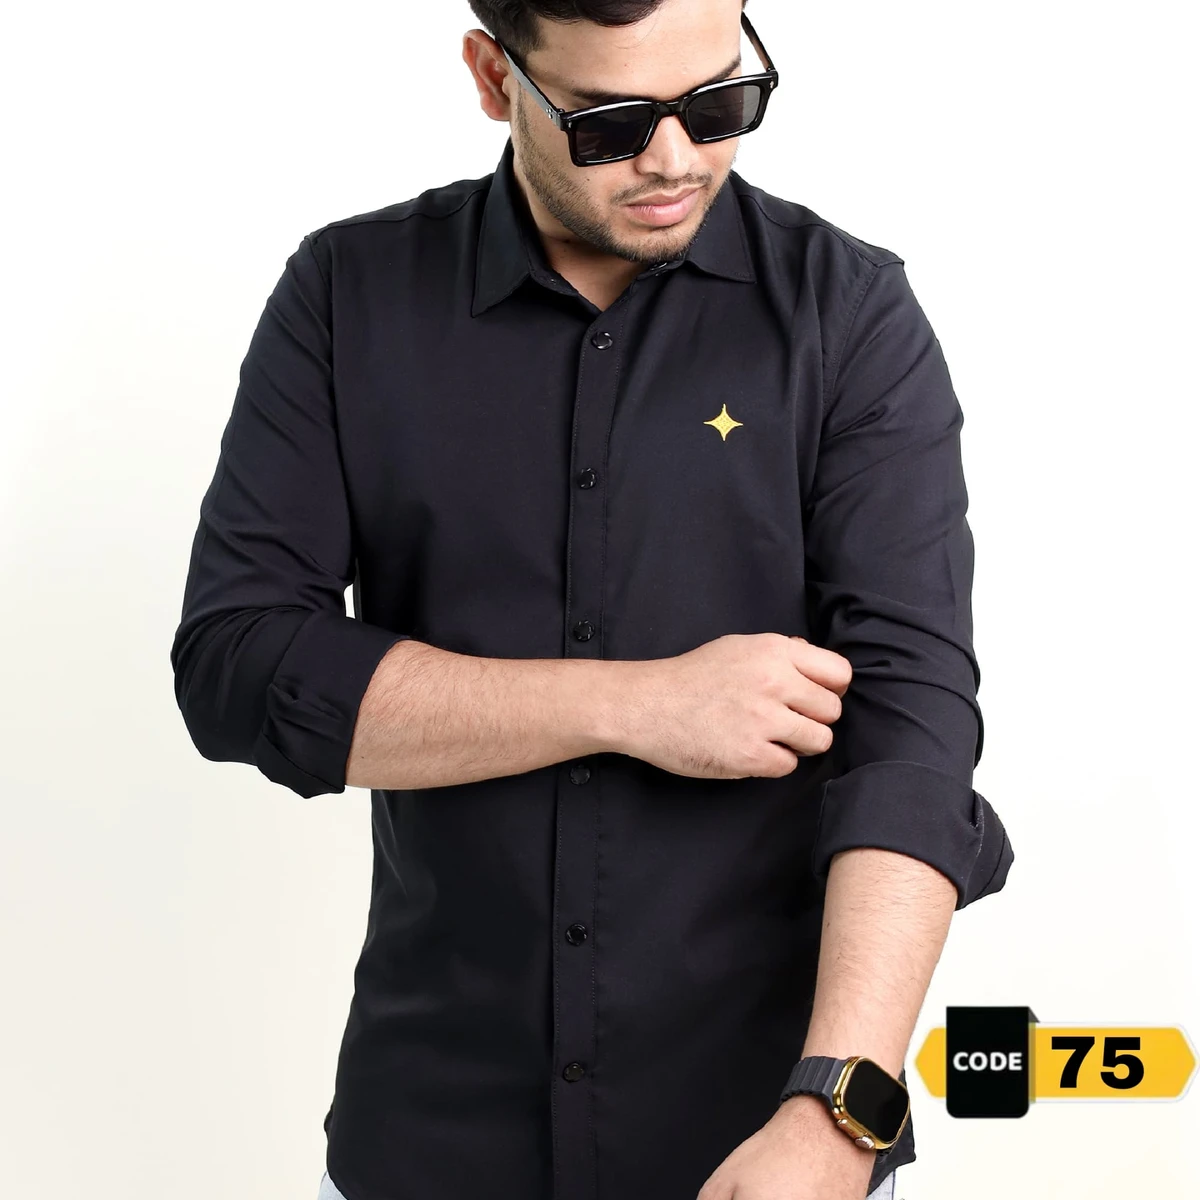 Black-Solide Colour Full Sleeve Casual Shirt - (Code-75)